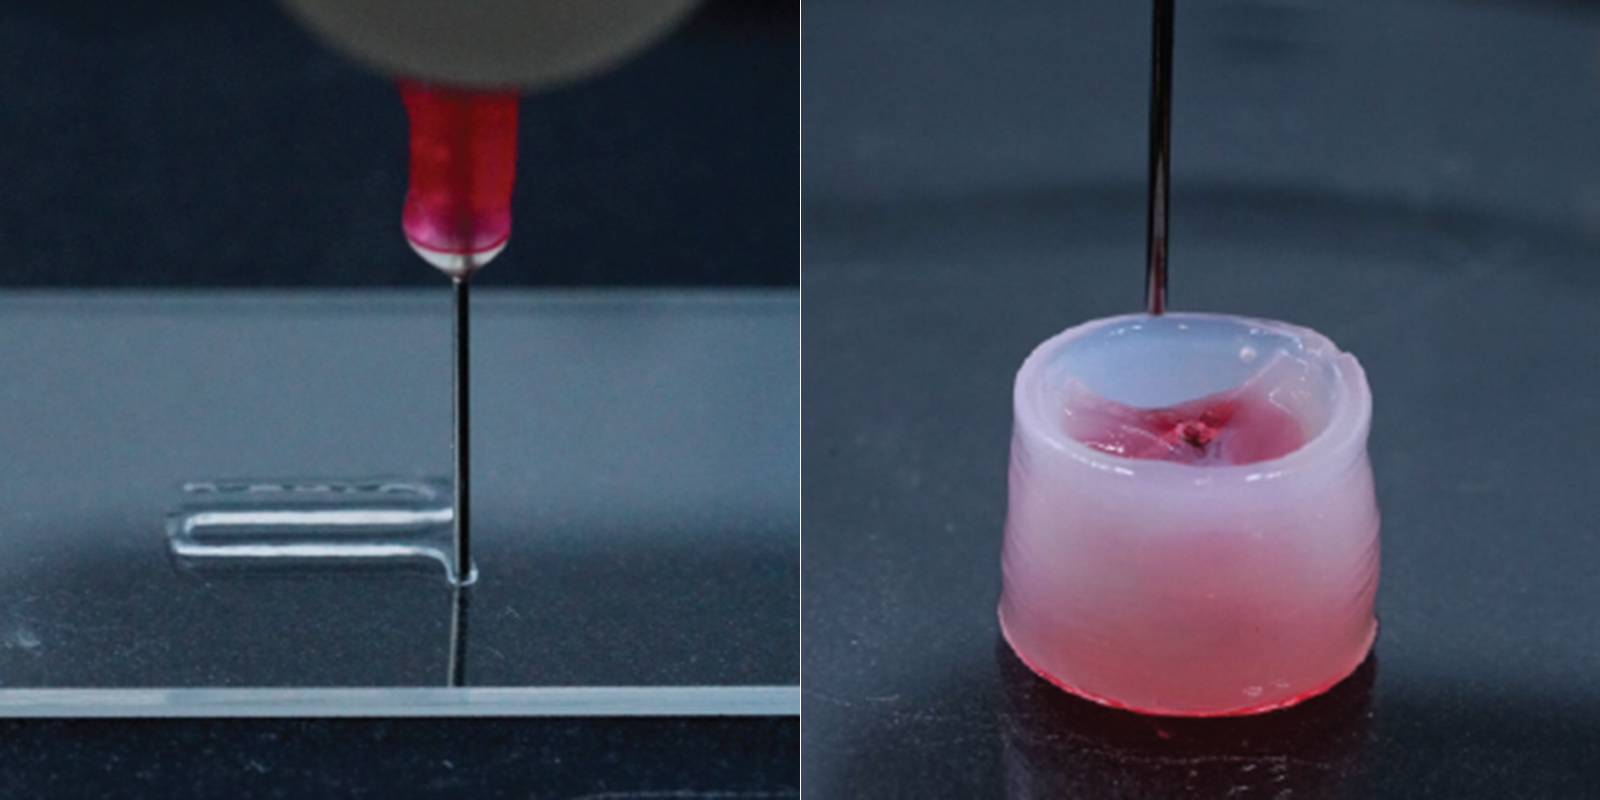 The new carrier ink can be used to produce personalized implants such as heart valves. (Photograph: Guzzi, et al. 2020)